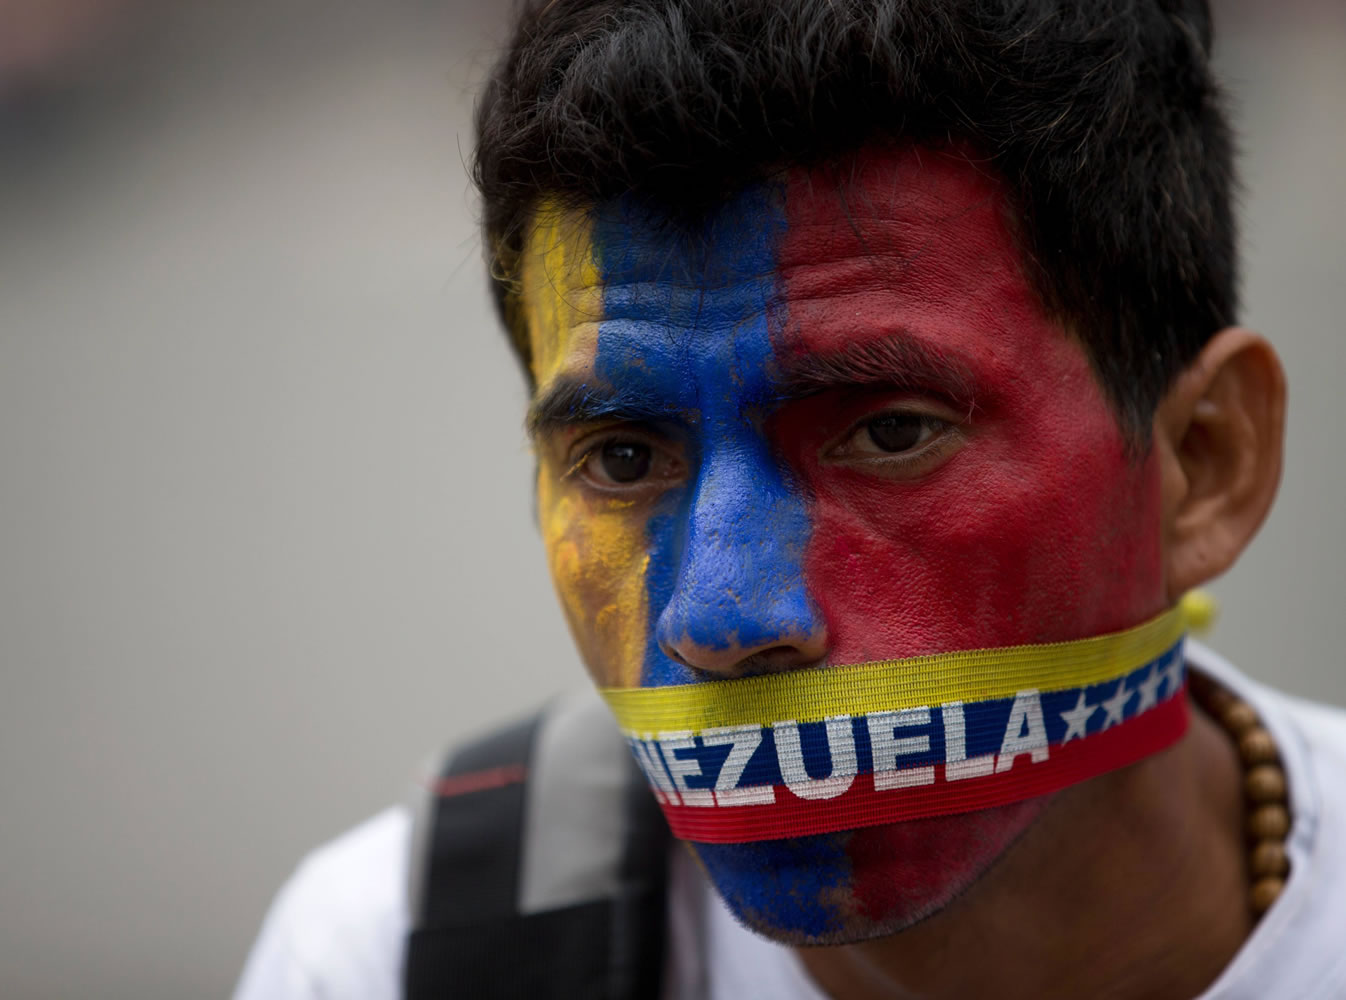 A man wears a narrow strip featuring the colors of Venezuela's flag over his mouth in protest Thursday of officials breaking up camps in Caracas, Venezuela, maintained by student protesters.